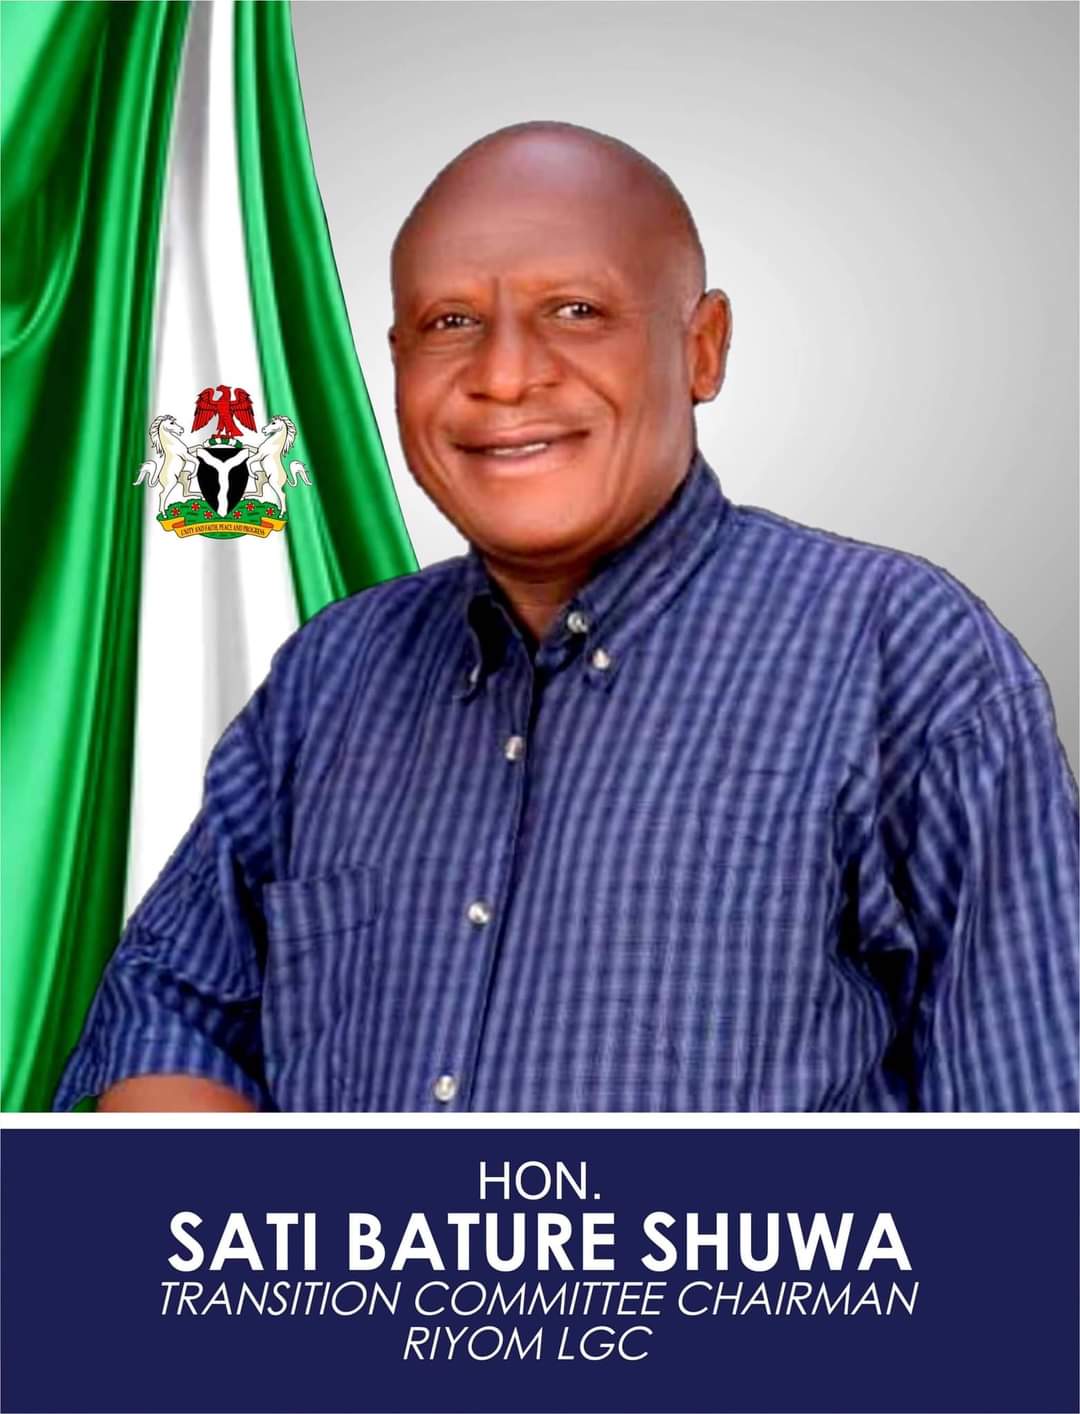 Easter: Riyom Local Government Council Boss, Hon. Sati Shuwa Urge Citizens to Demonstrate Love, Peace and Forgiveness